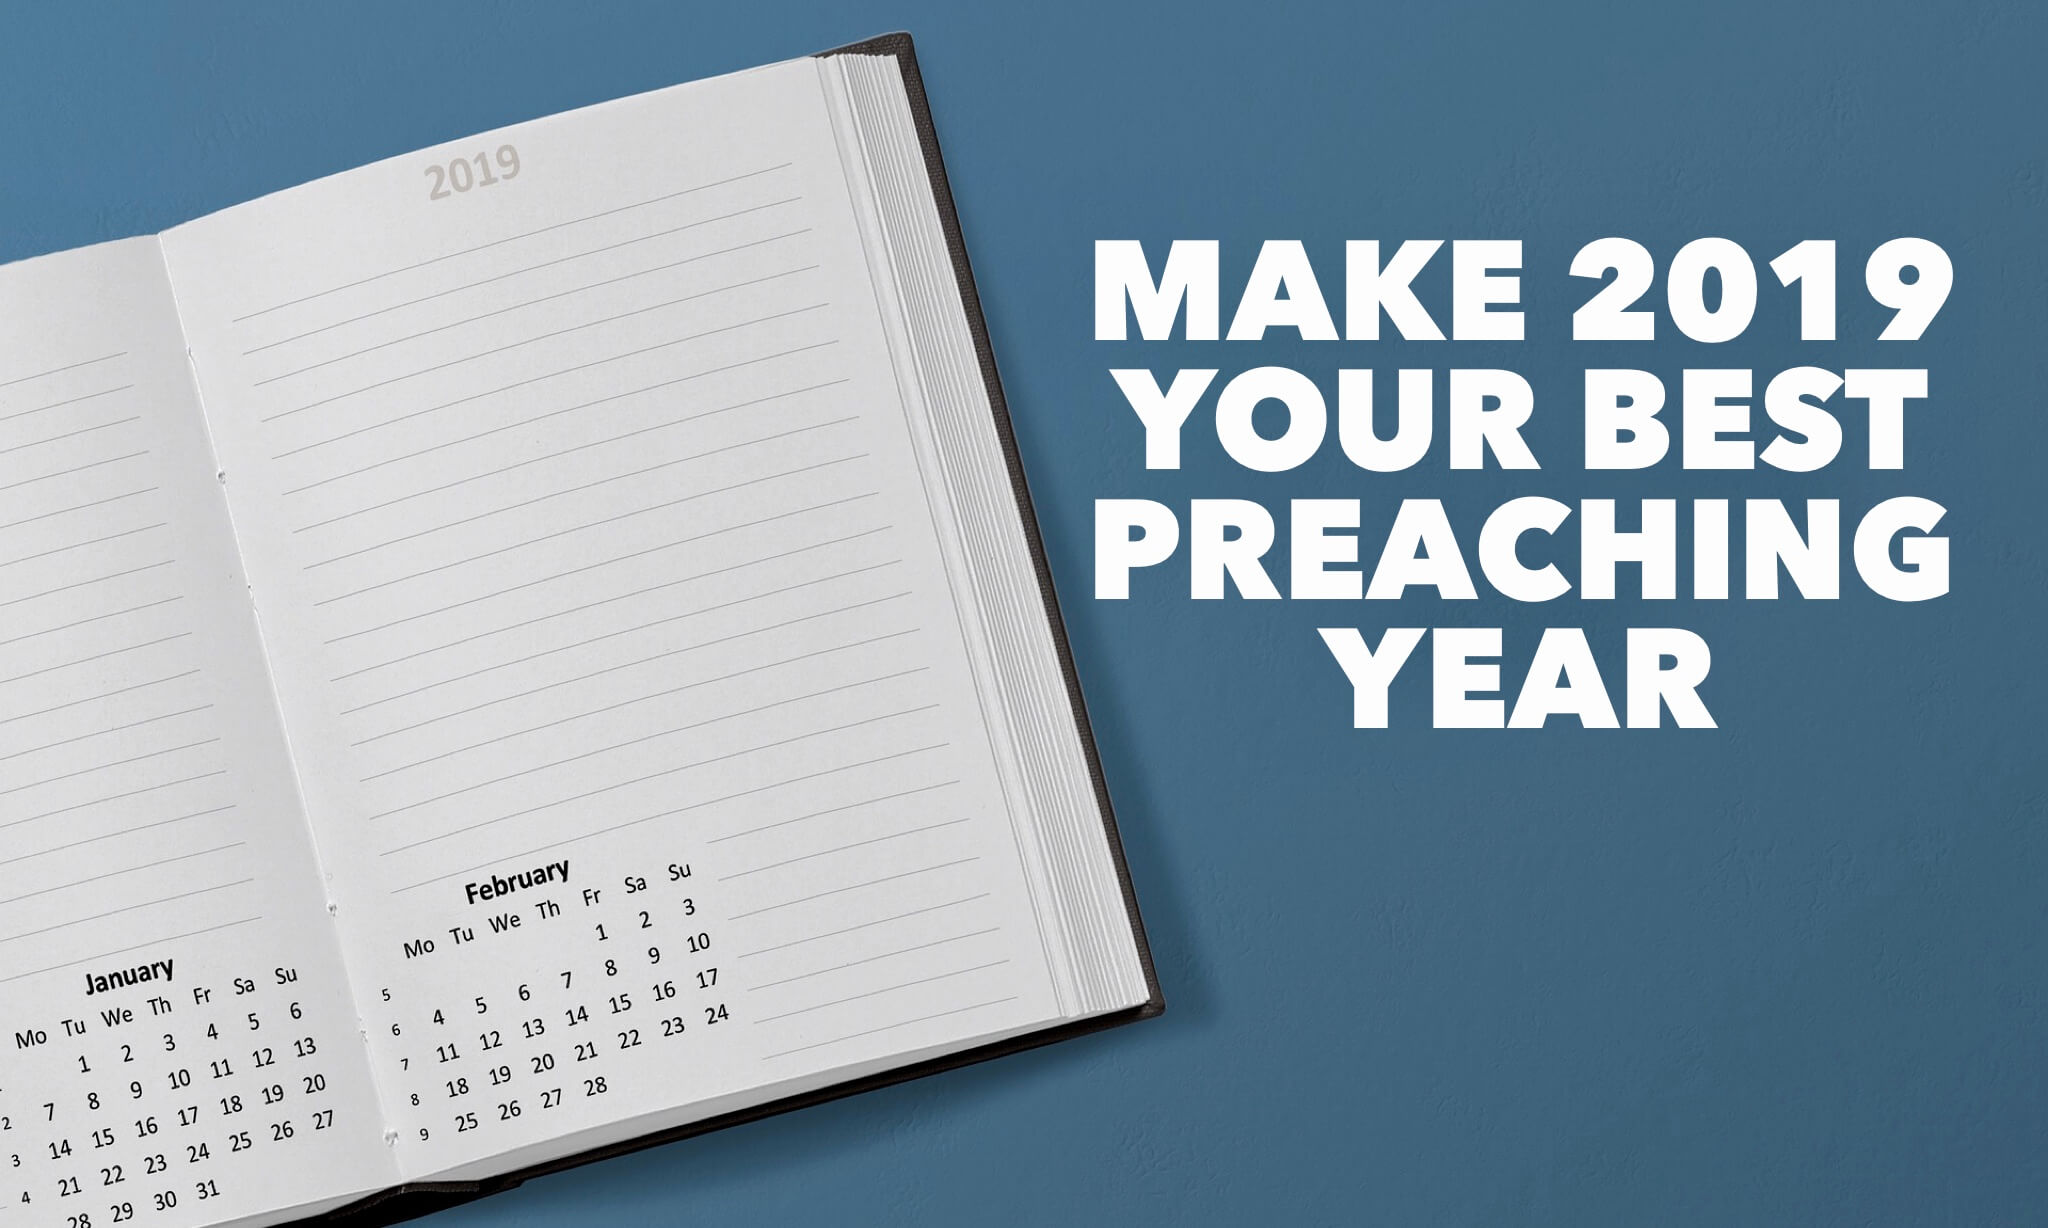 3 Ways to Make 2019 Your Best Preaching Year